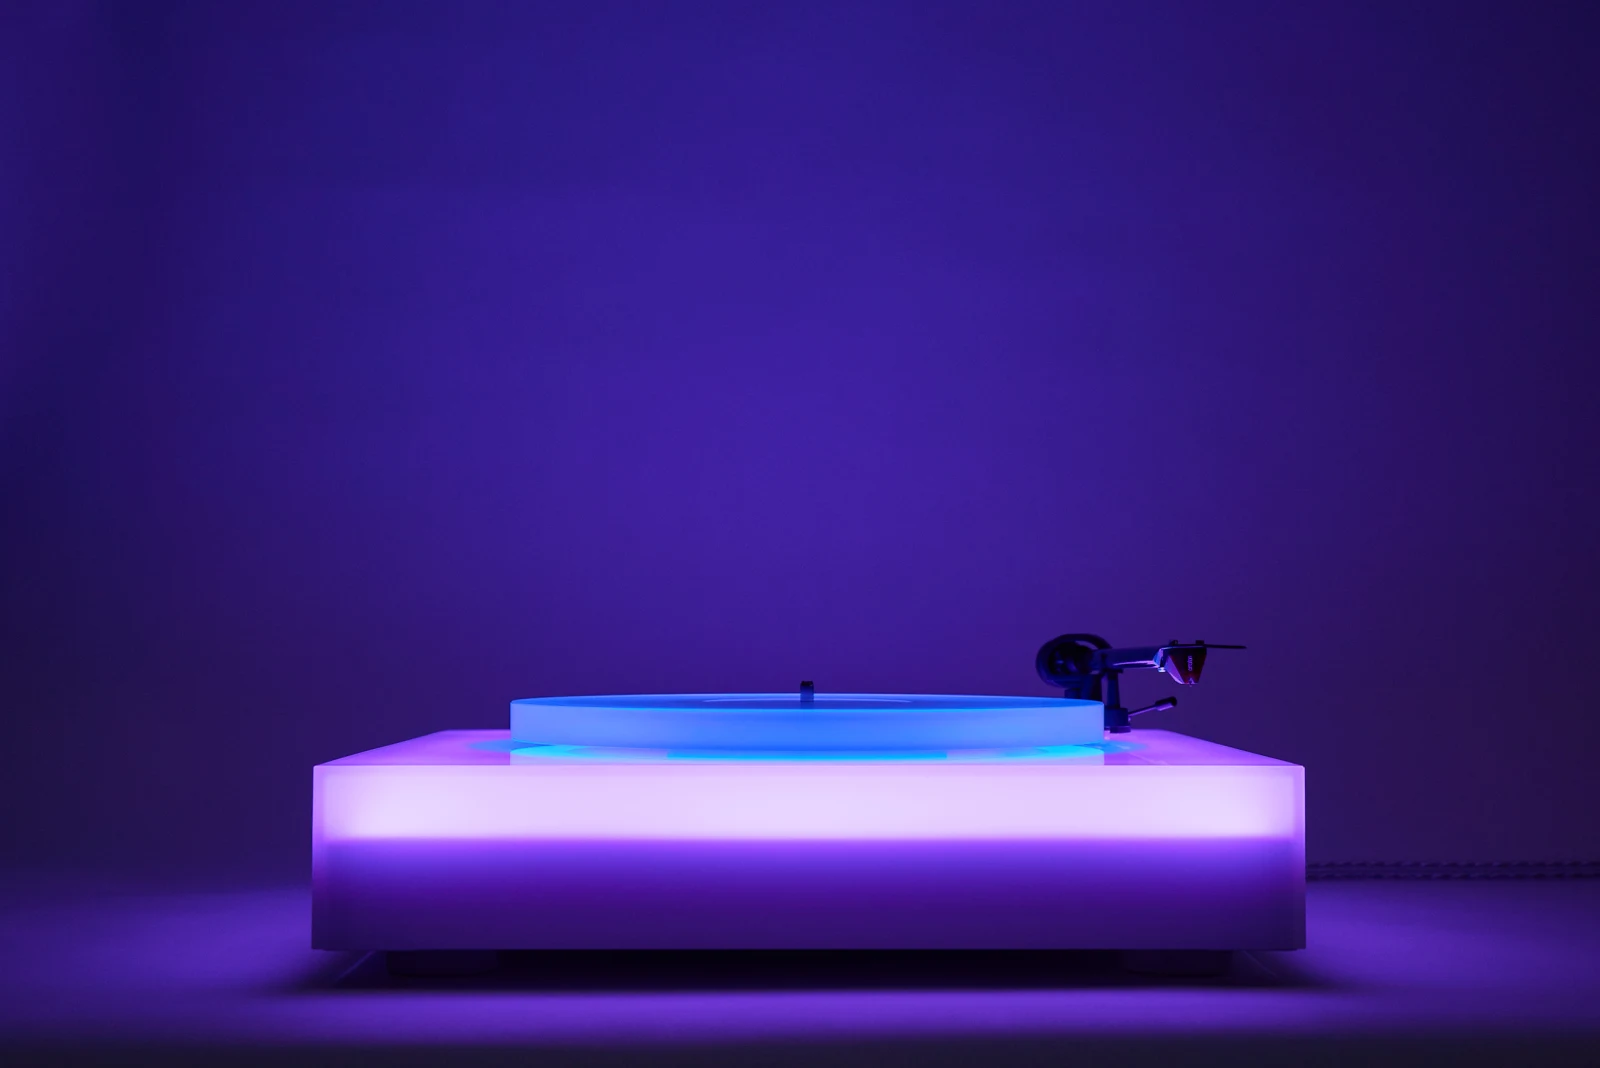 The $25,000 Turntable Designed by Brian Eno That Glows in Different Colors  as It Plays